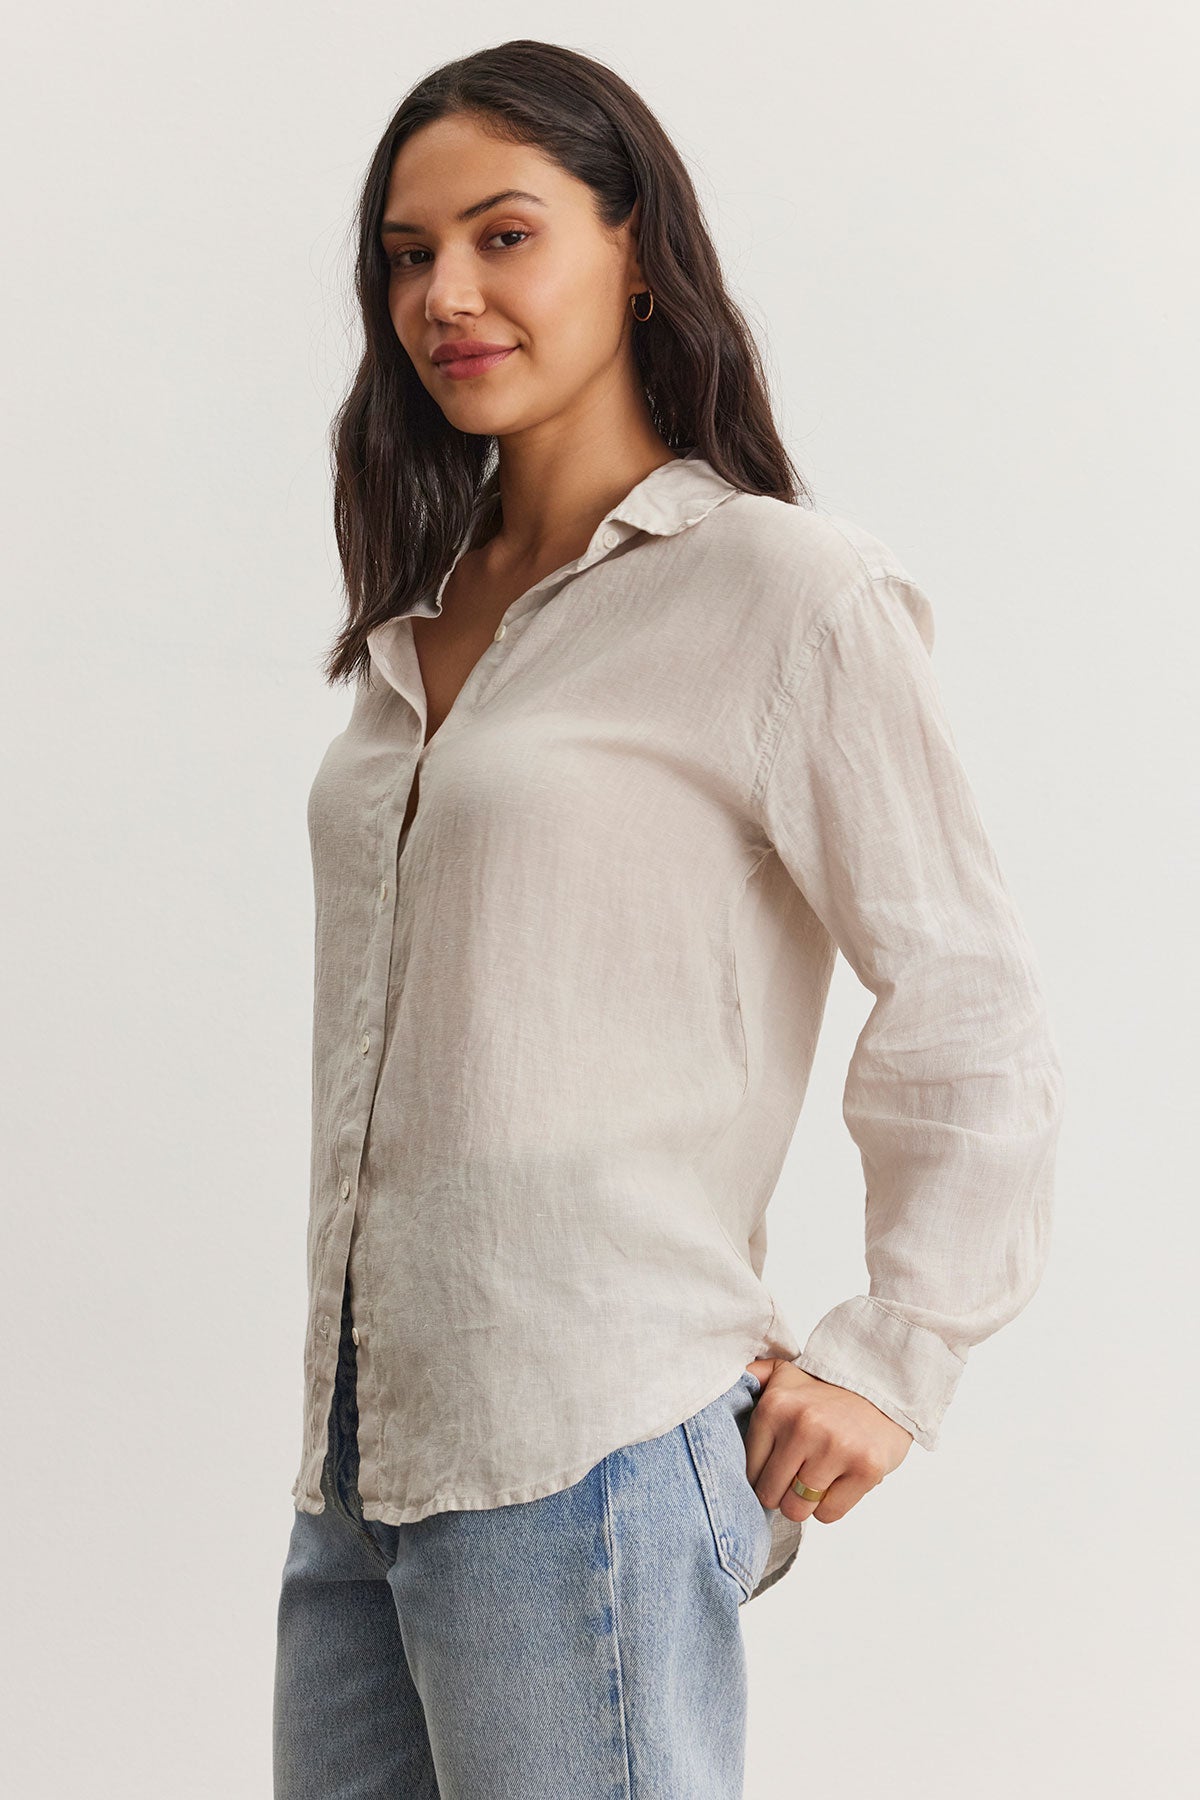 A woman wearing a Velvet by Graham & Spencer Willow Linen Button-Up Shirt and blue jeans, standing with one hand on her hip and looking relaxed.-36998739099841